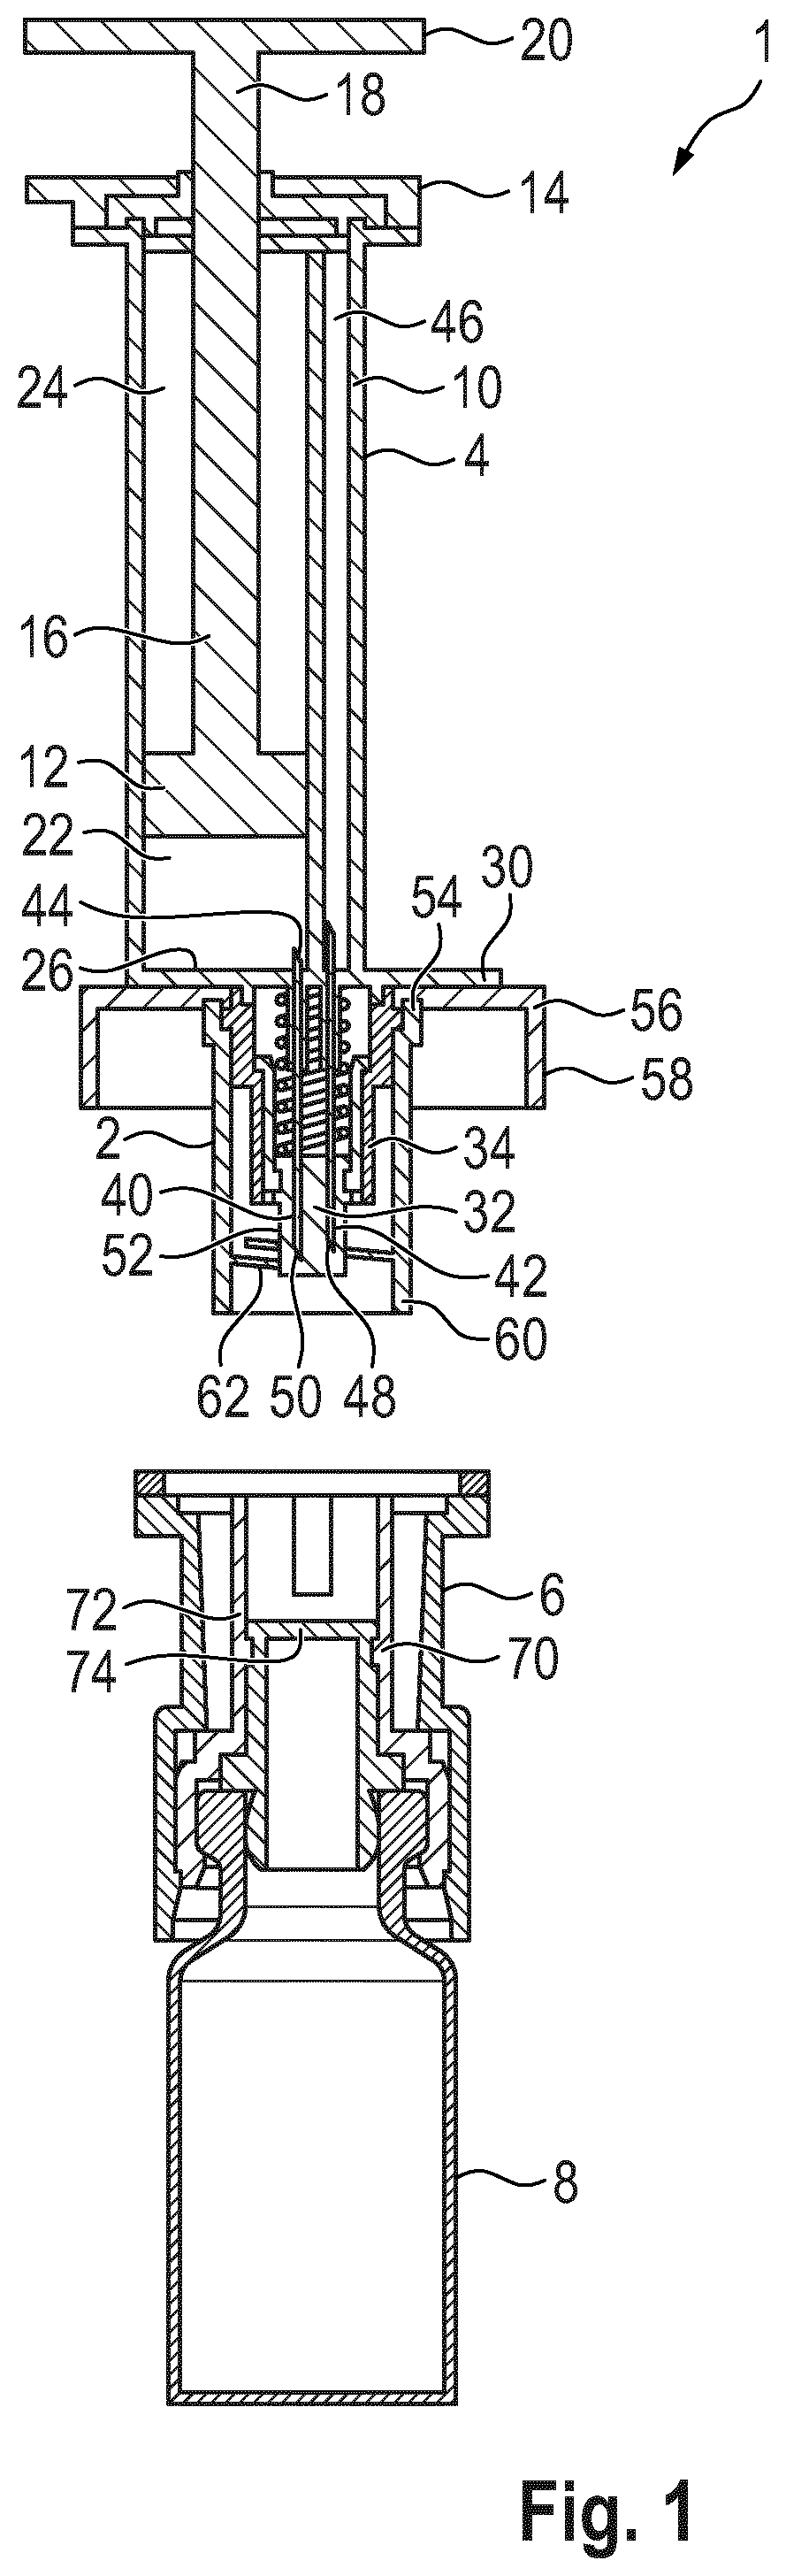 Fluid transfer system and components therefor